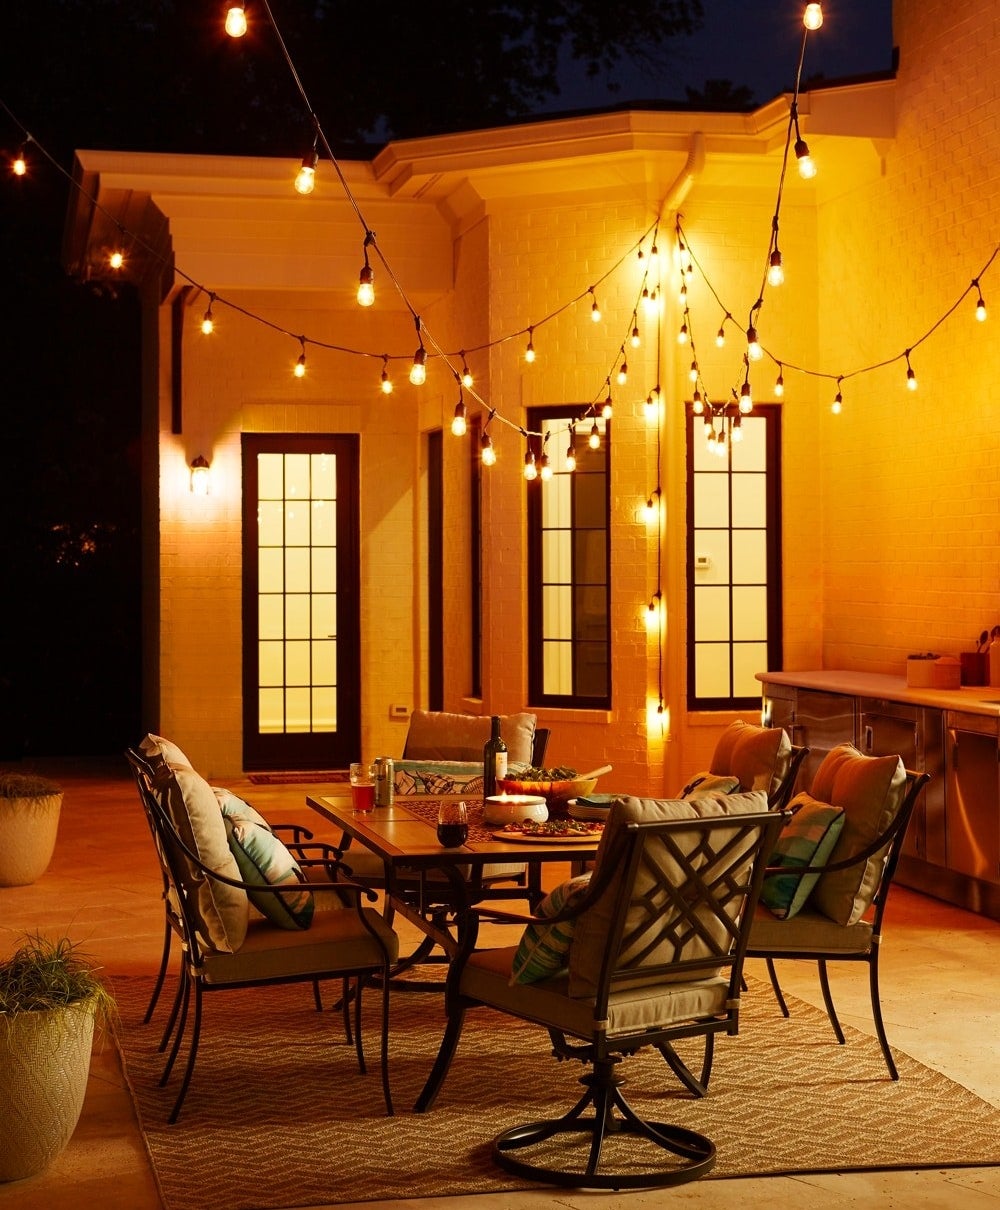 the lights hung on a patio